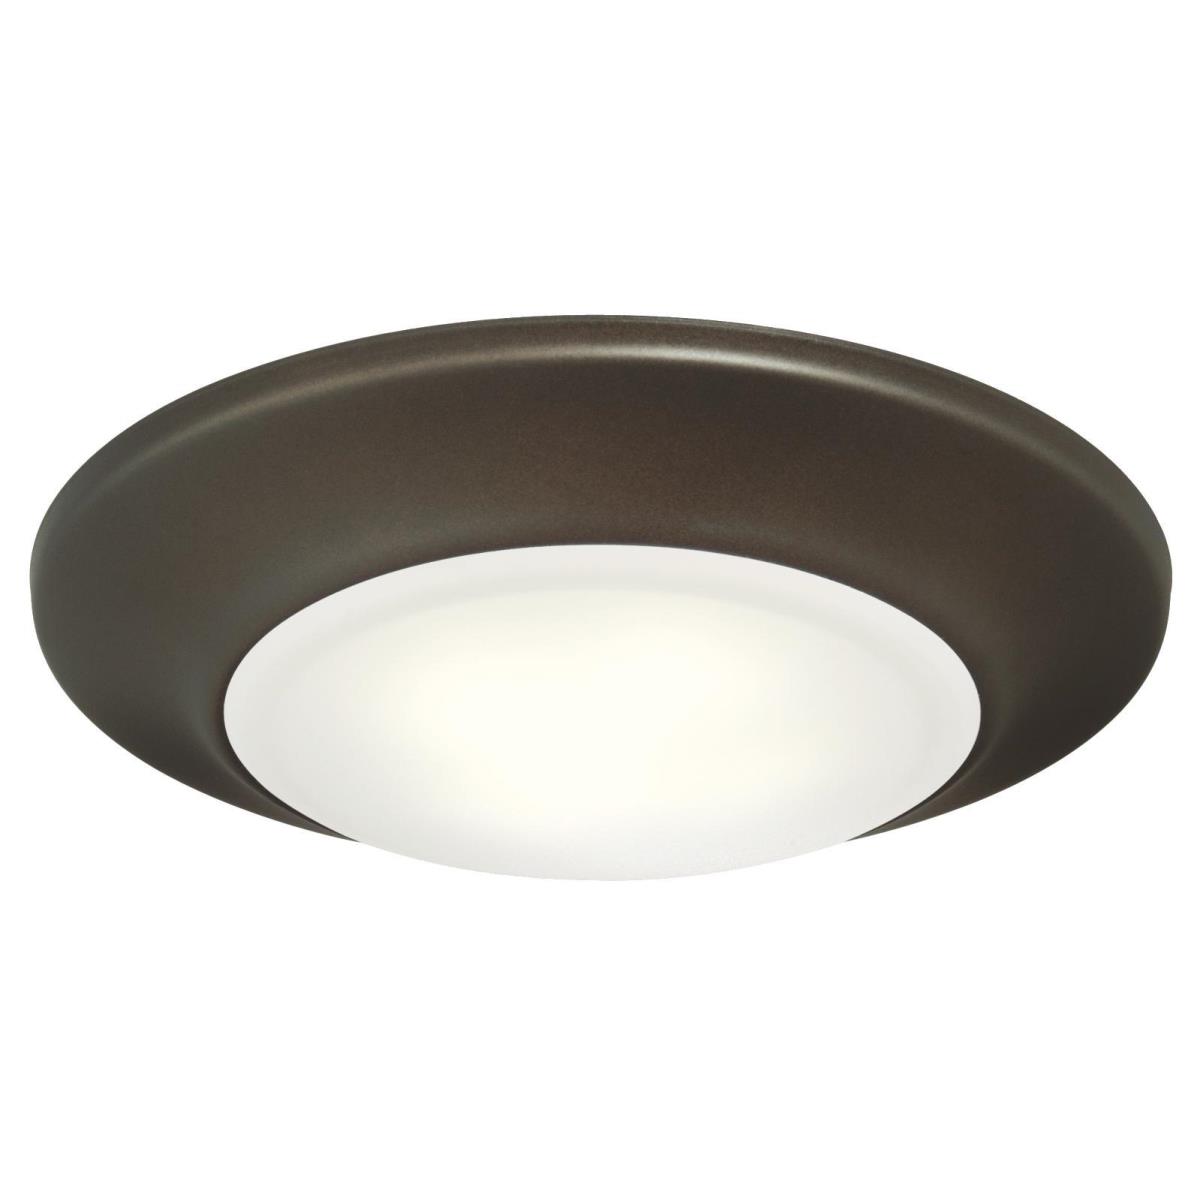 Small LED Surface Mount Oil Rubbed Bronze Finish with Frosted Lens